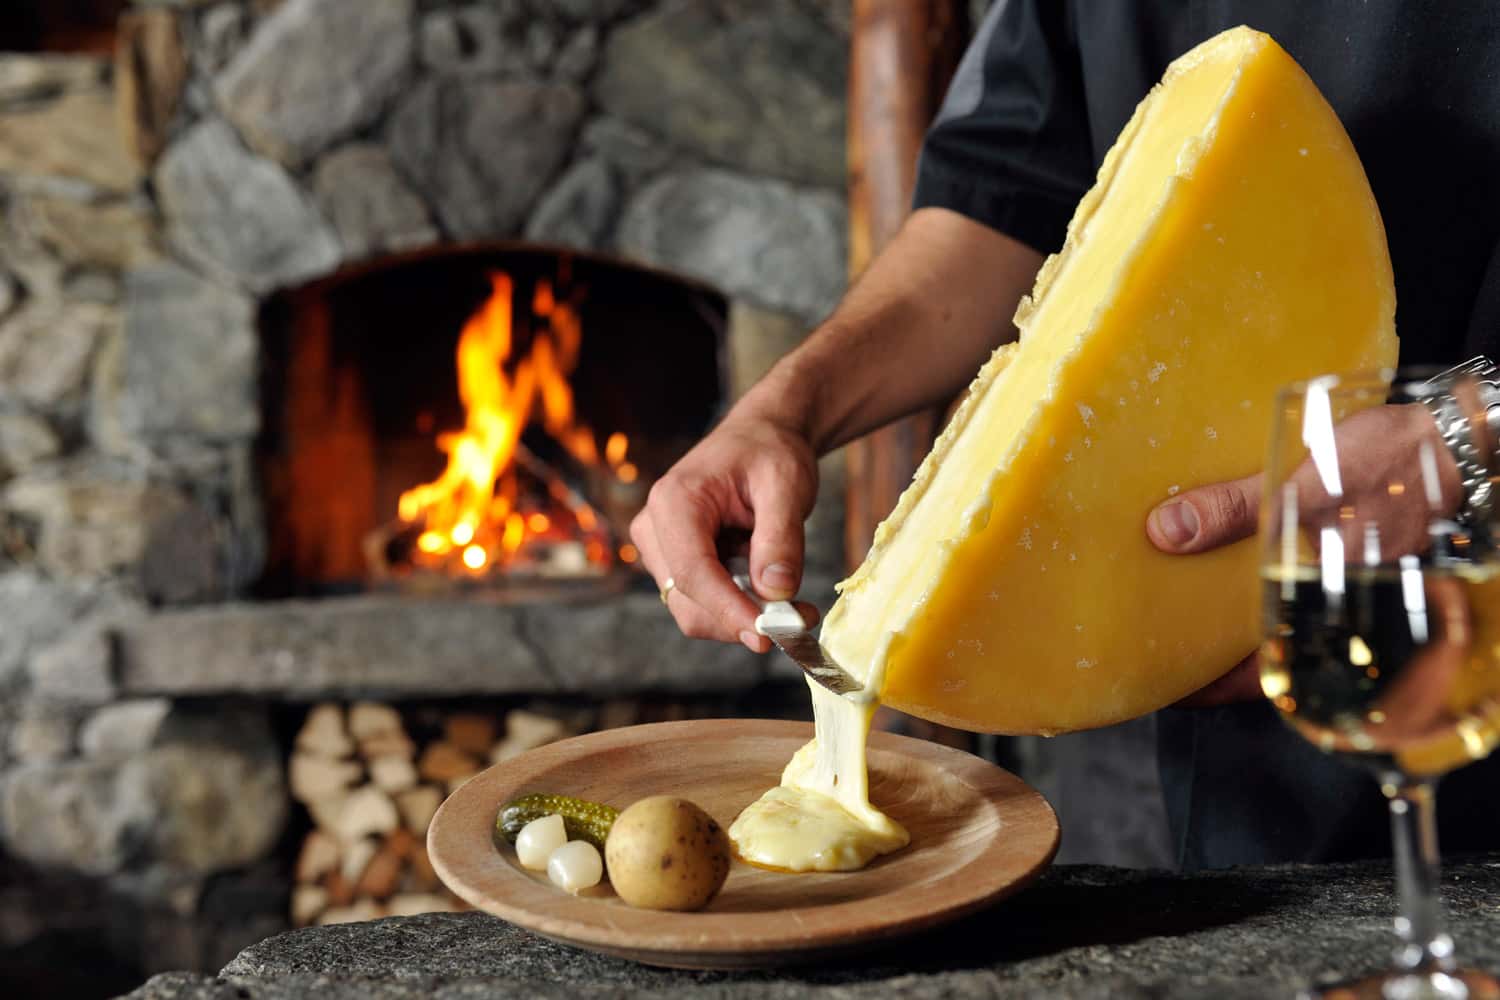 On Alpenwild’s Cheese, Chocolate, and Wine in the Scenic Alps tour, guests have the option to make artisan alpine cheese. 